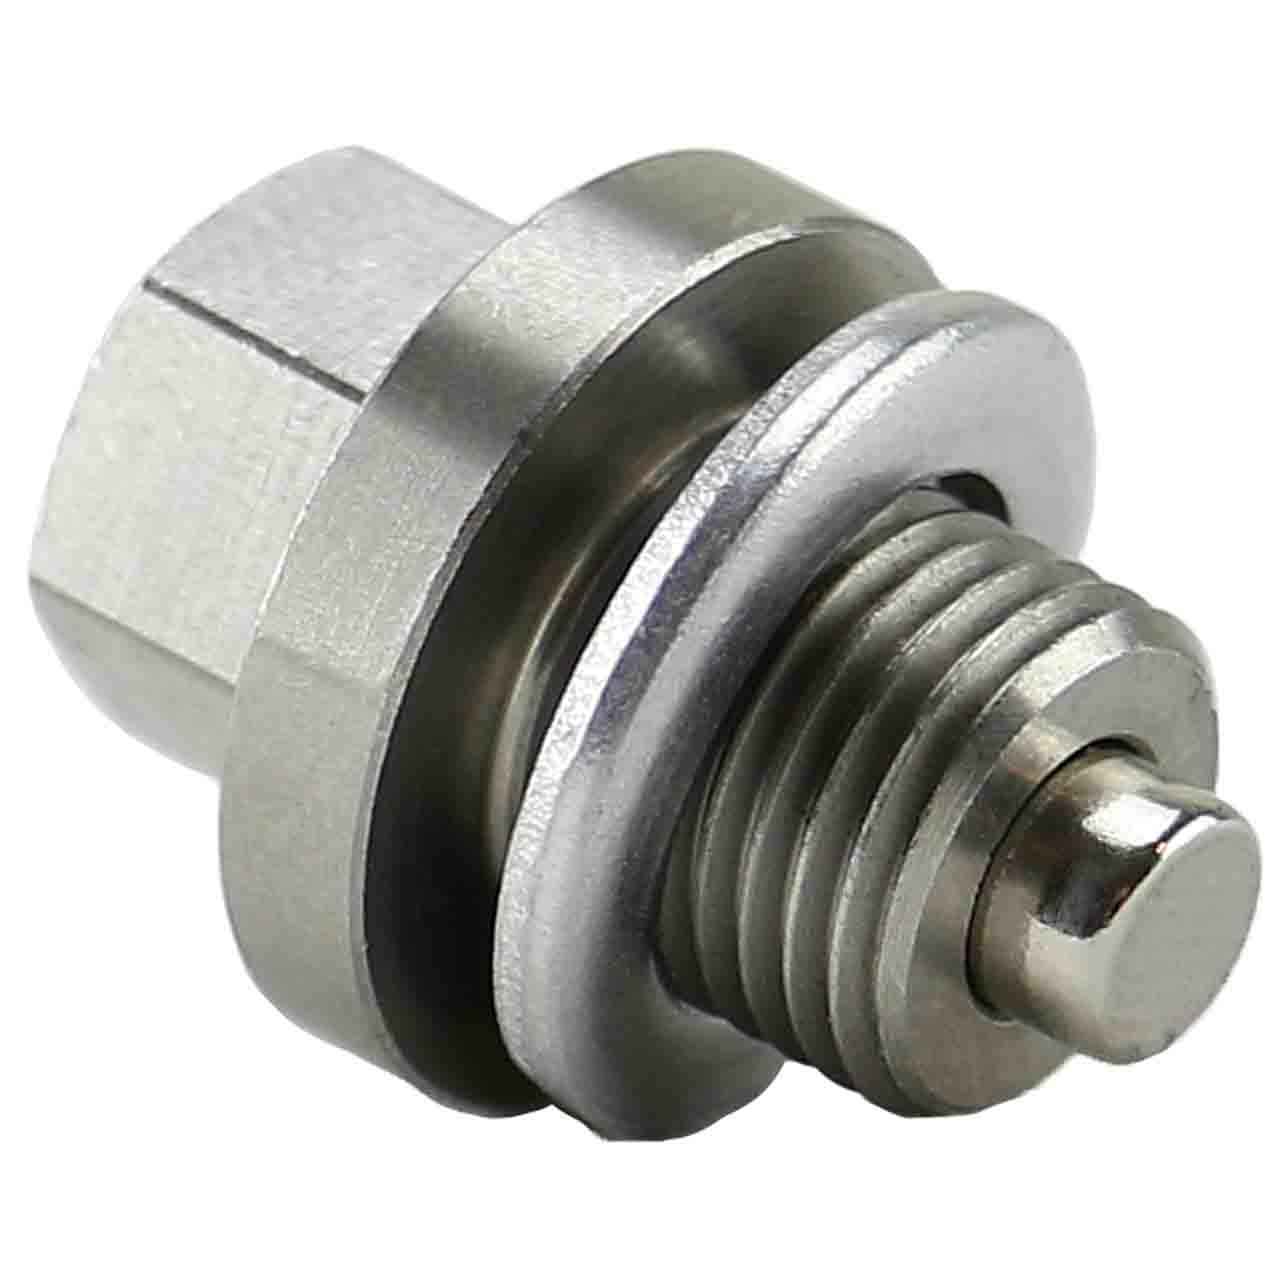 M10 X 1.0 X 10.75 MM Stainless Steel ENGINE Magnetic Oil Drain Plug with Neodymium Magnet - Made In USA - Part Number DP030